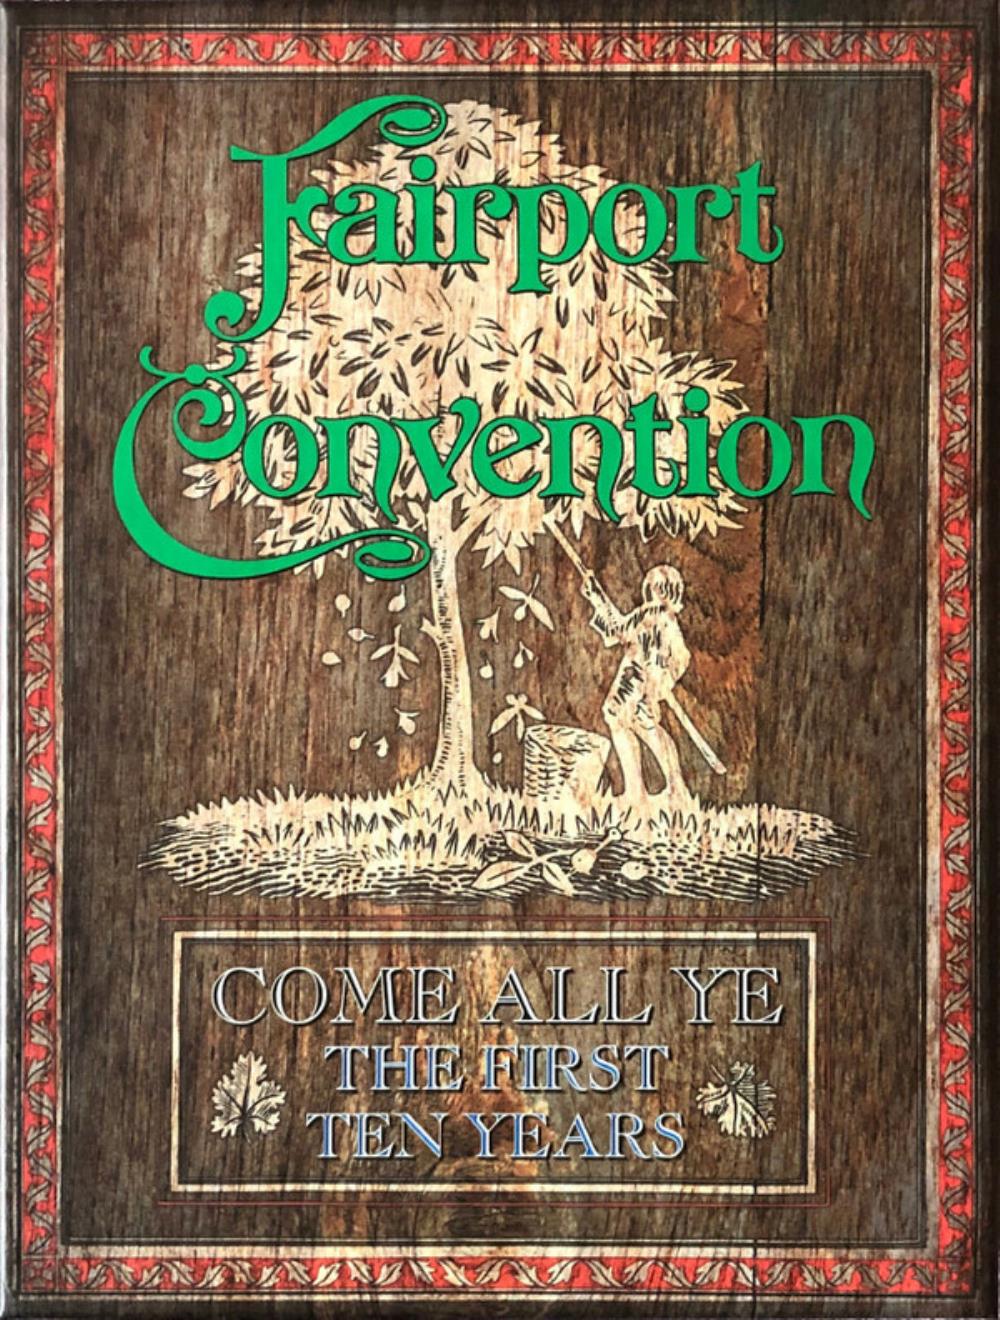 Fairport Convention - Come All Ye: The First Ten Years CD (album) cover